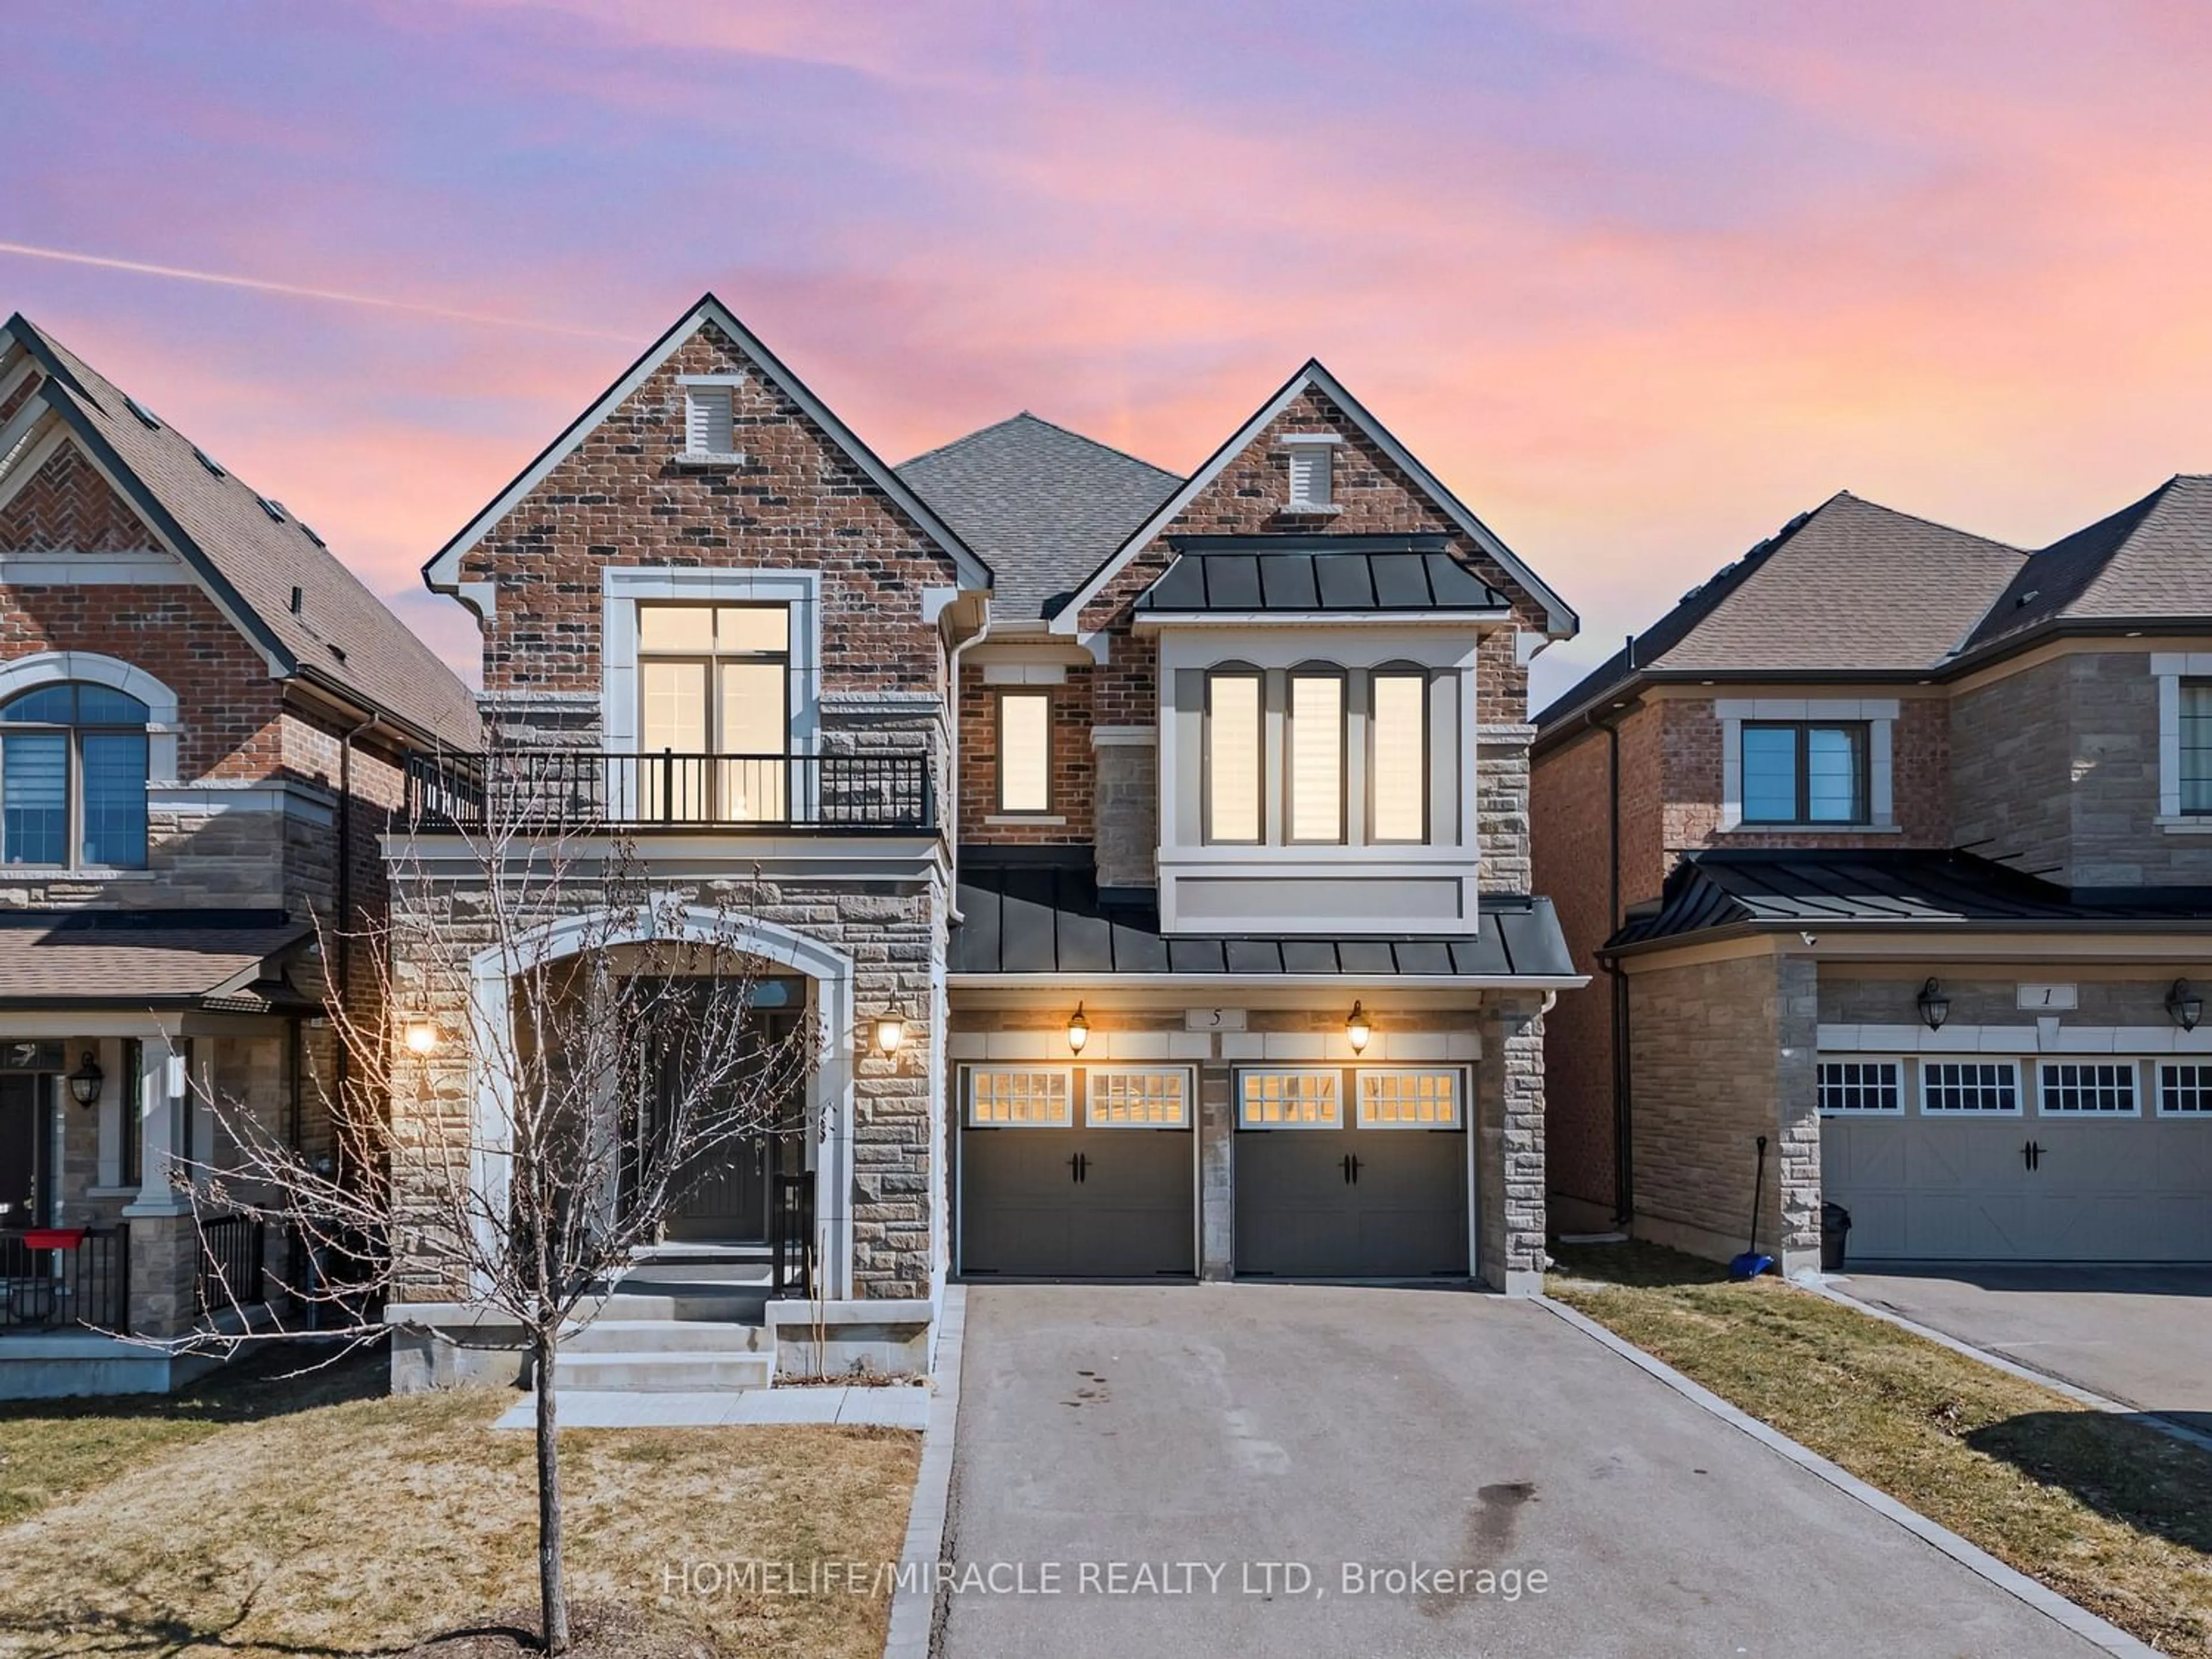 Home with brick exterior material for 5 Arctic Grail Rd, Vaughan Ontario L4H 4T3